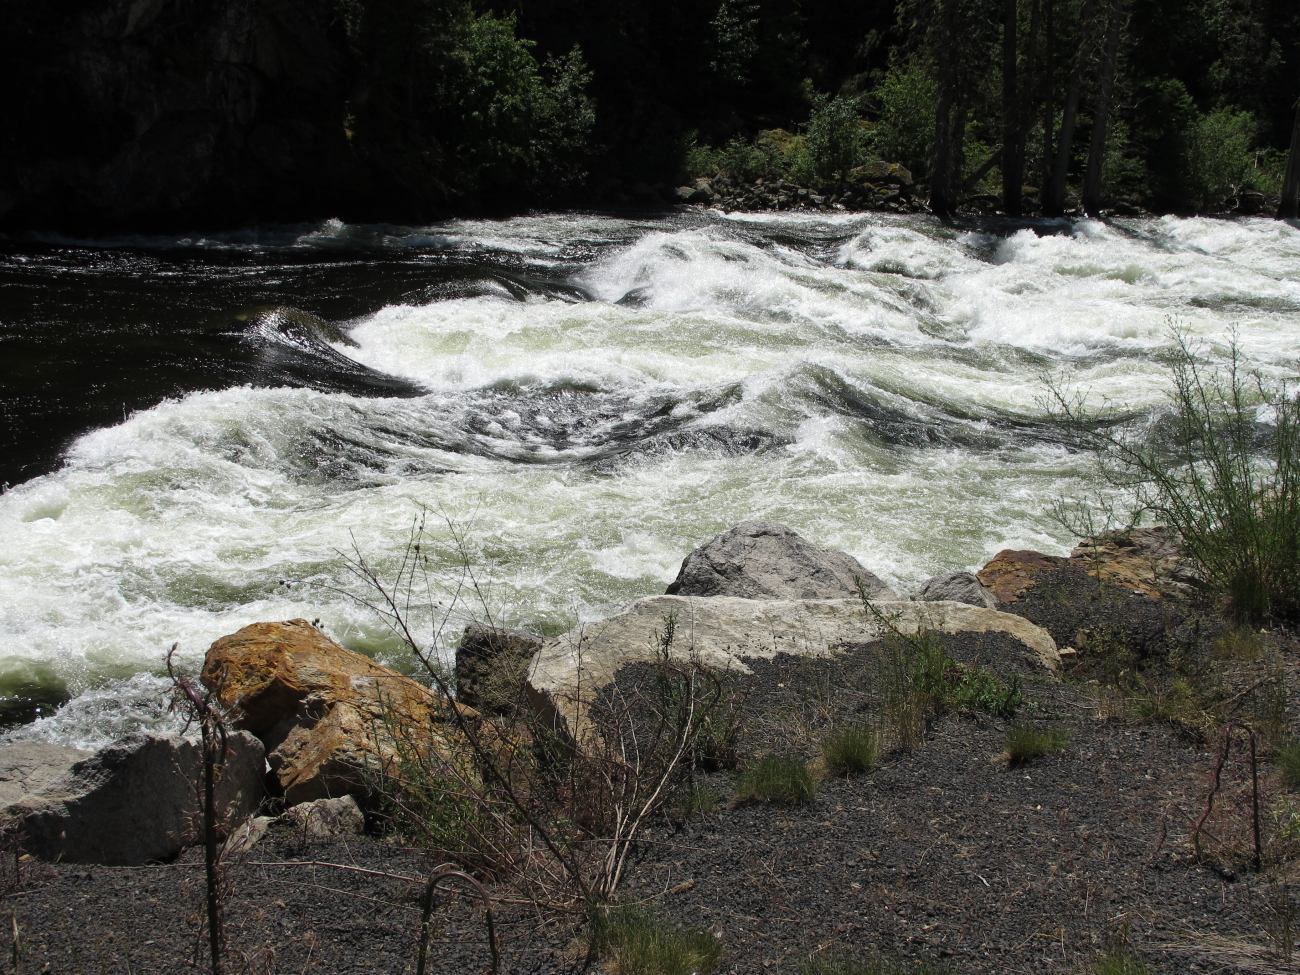 Big water on the Lochsa River